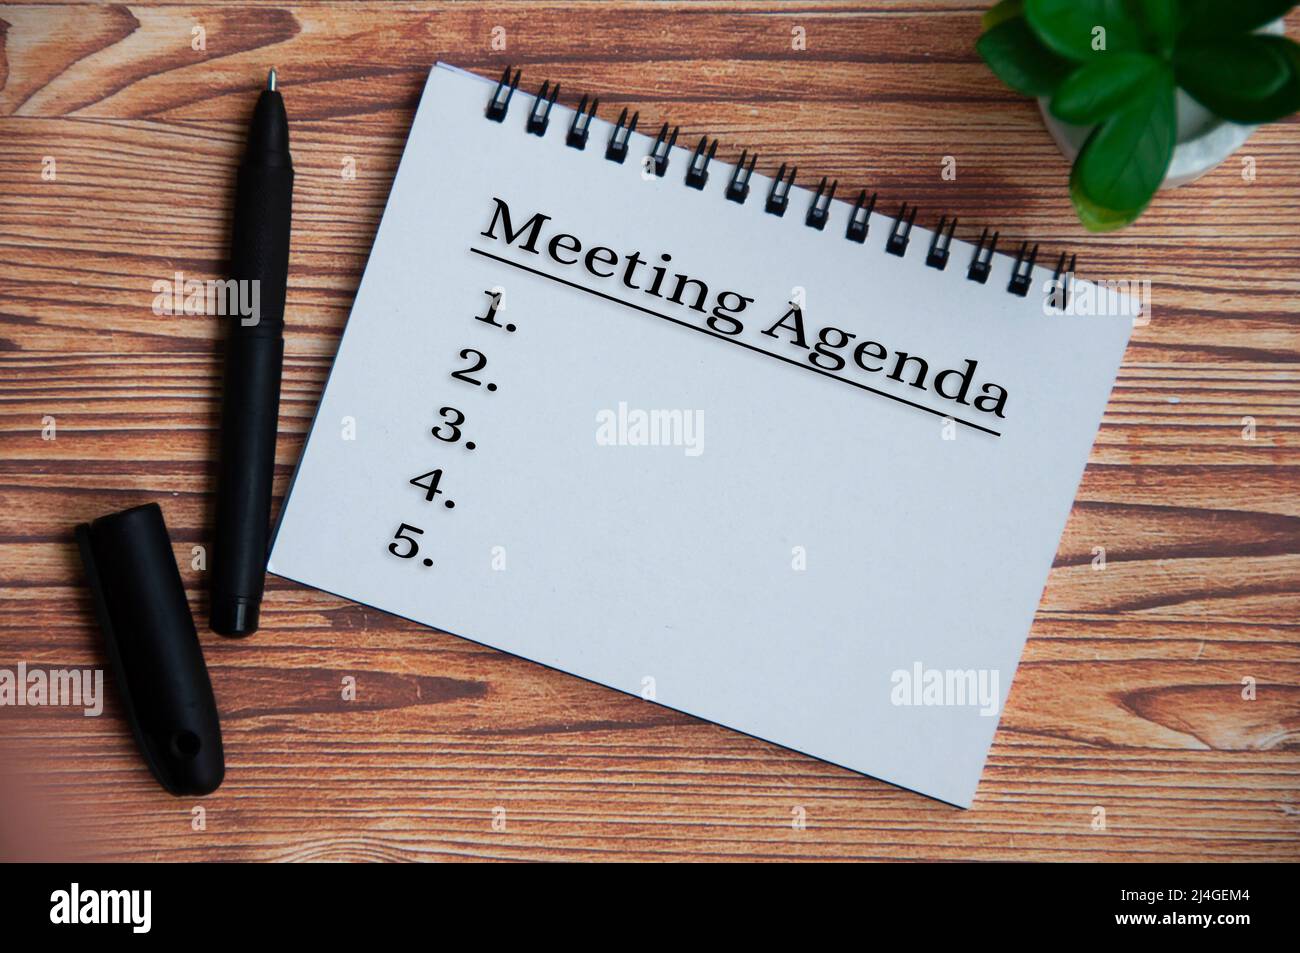 Meeting agenda text on notepad with plant, pen and wooden table background. Meeting concept Stock Photo